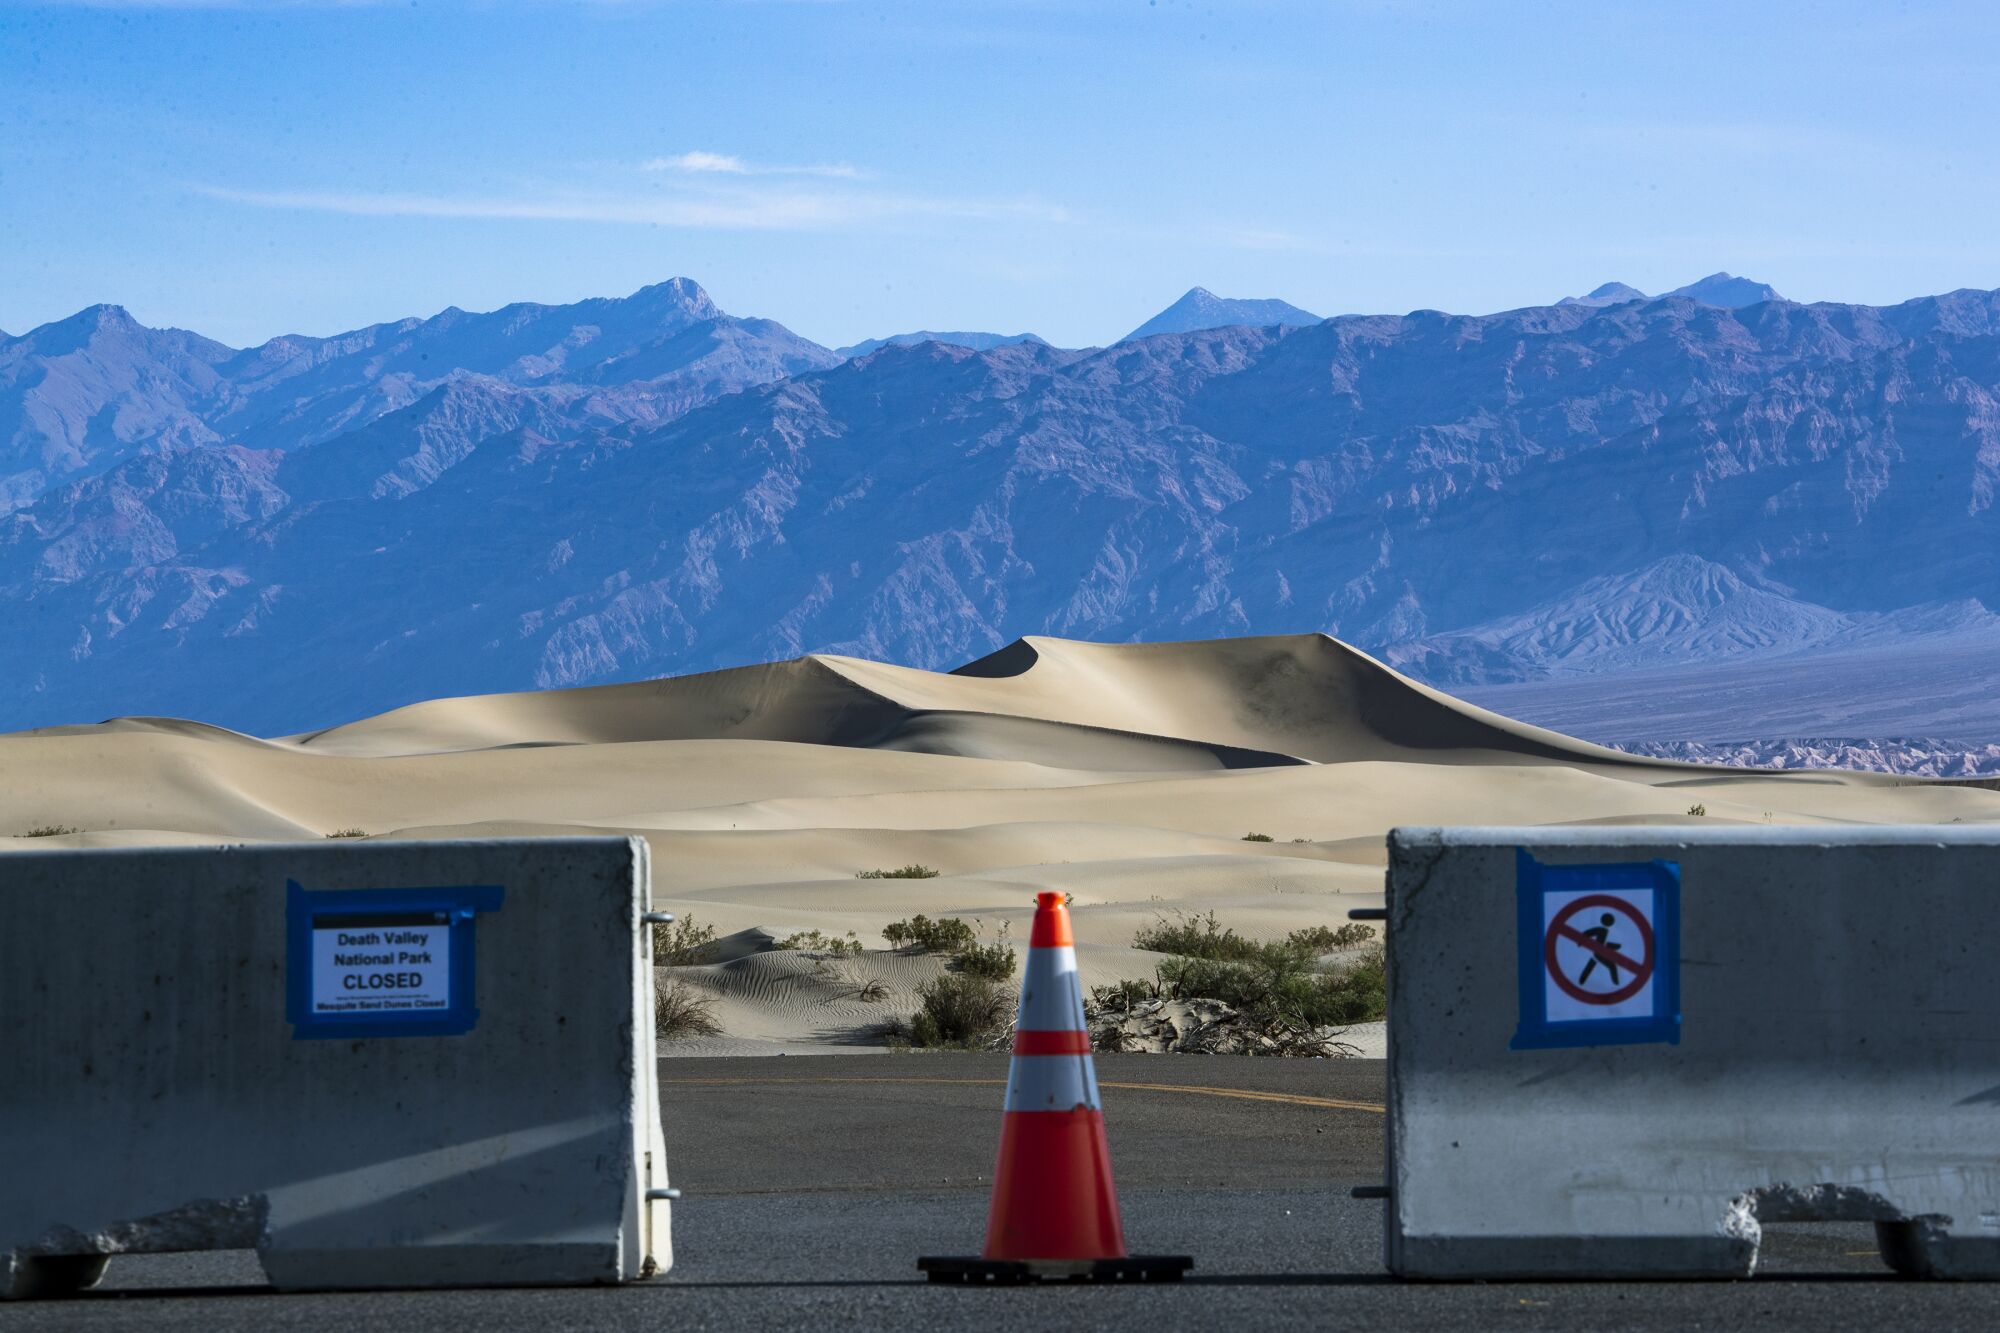 View of Mesquite Dunes, shutdown due to coronavirus at a closed Death Valley National Park, May 6, 2020.